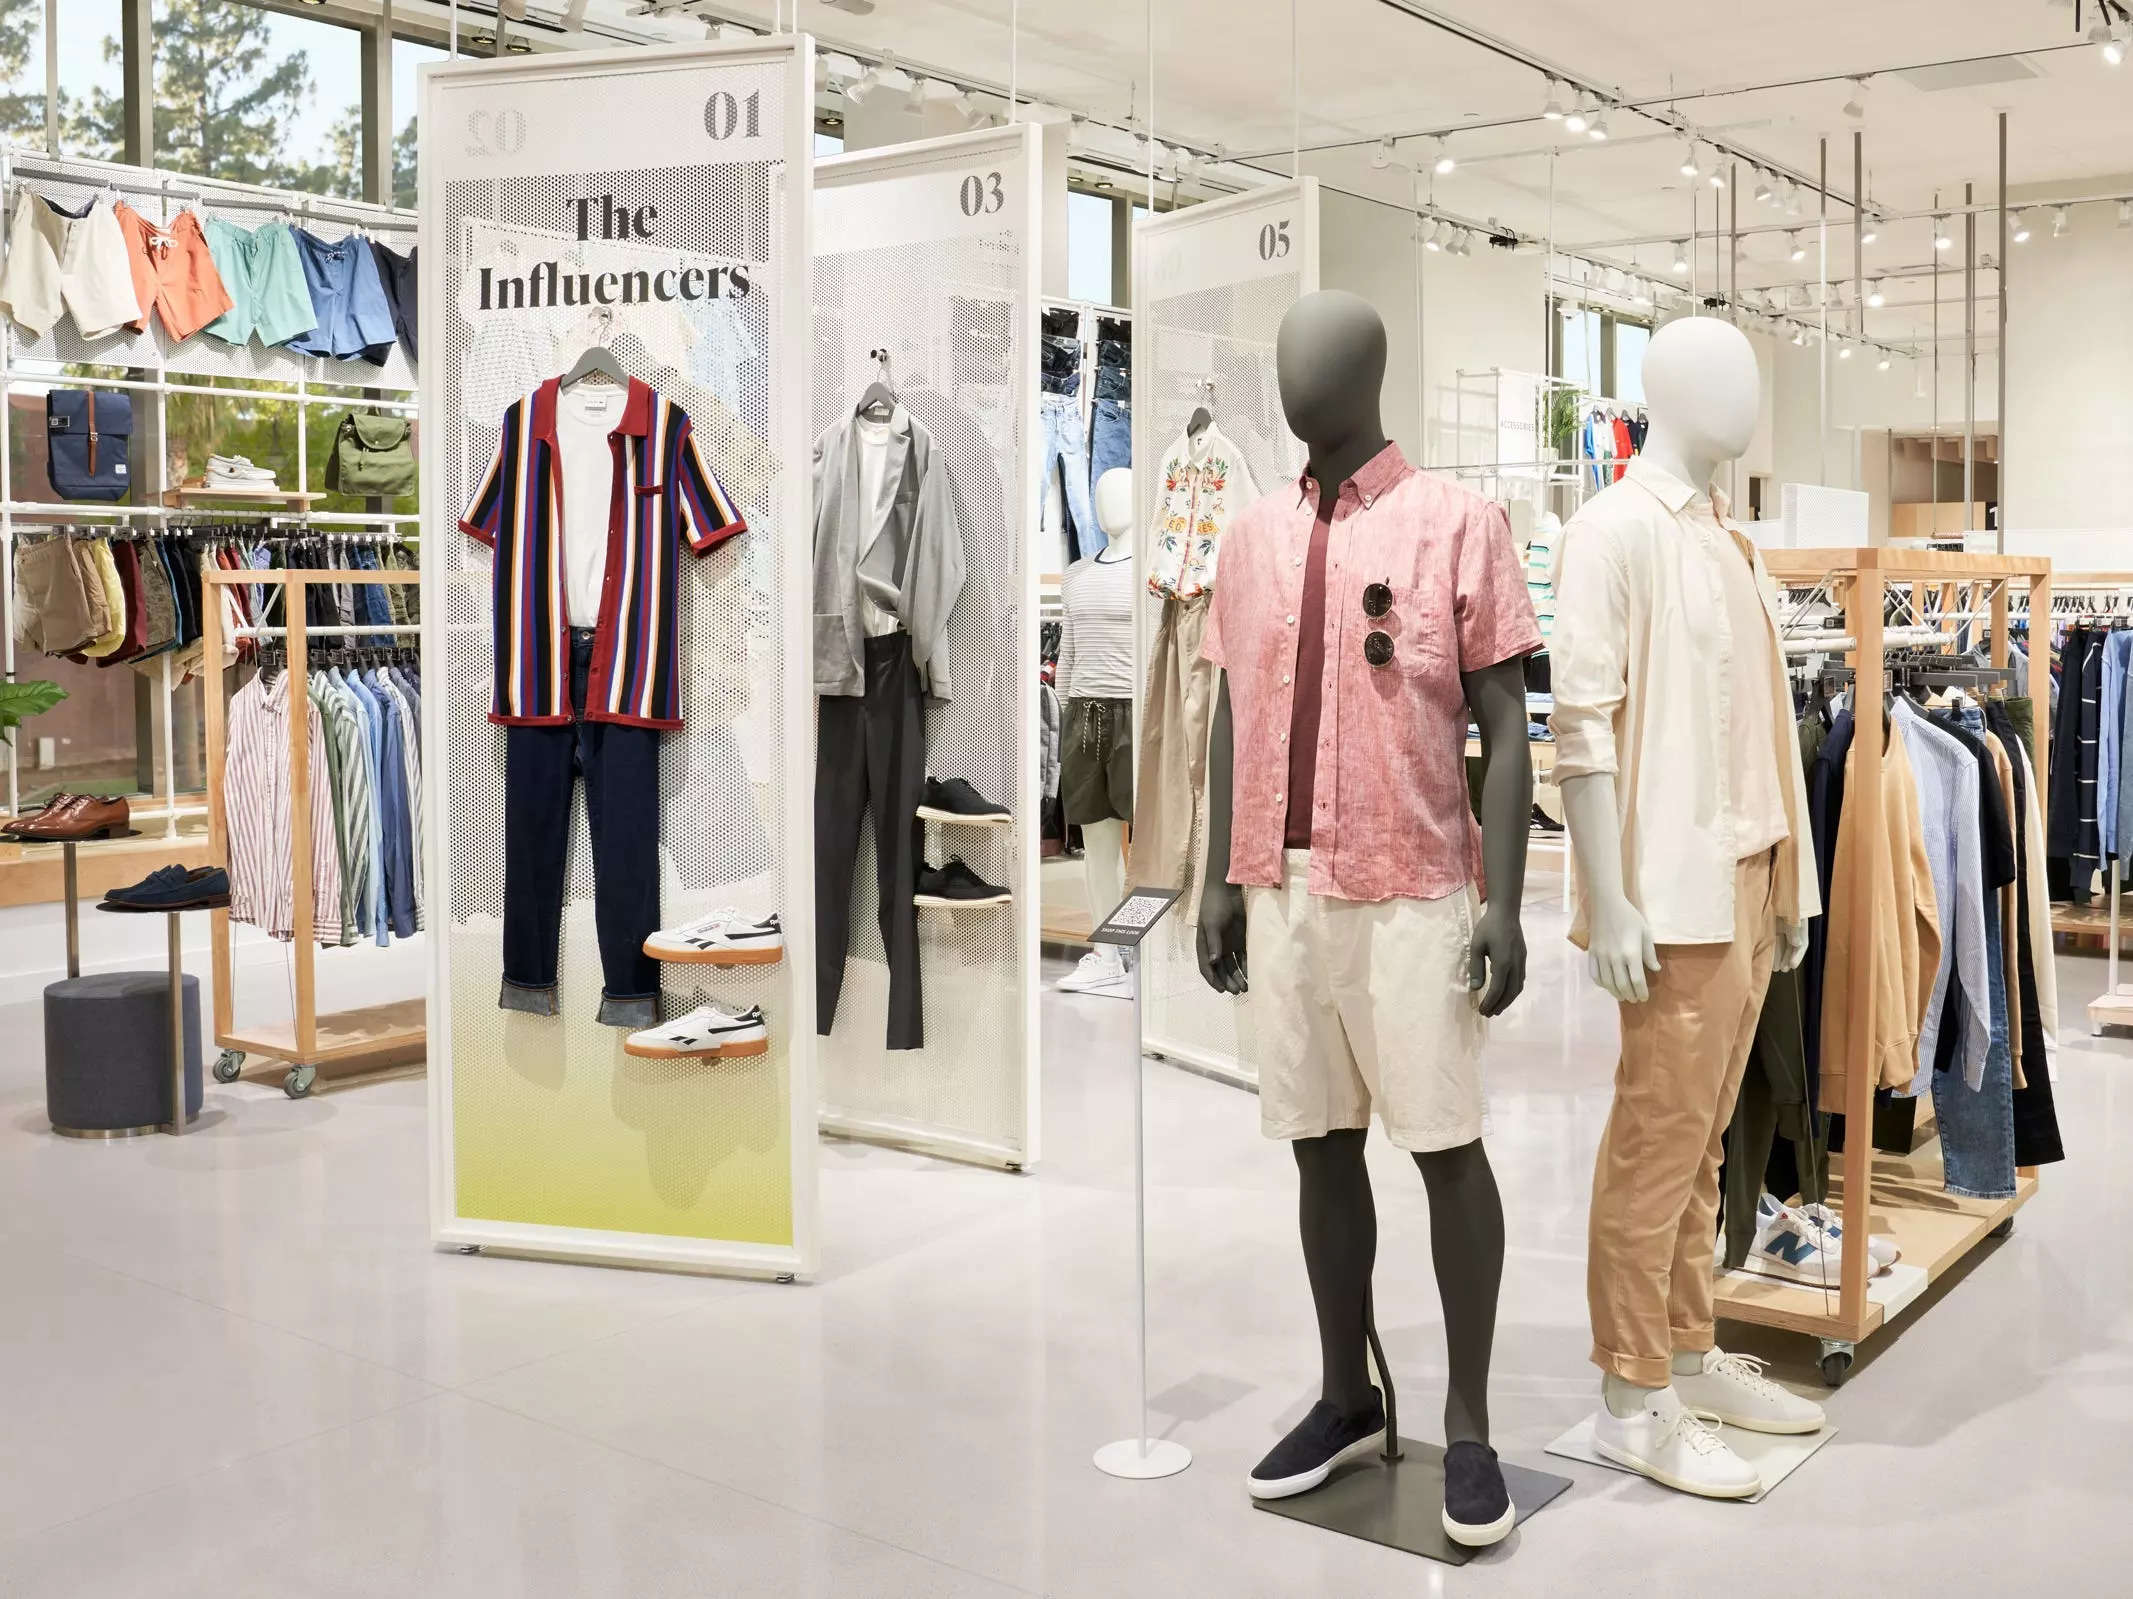 Amazon has opened its first brick-and-mortar clothing store, which uses ...